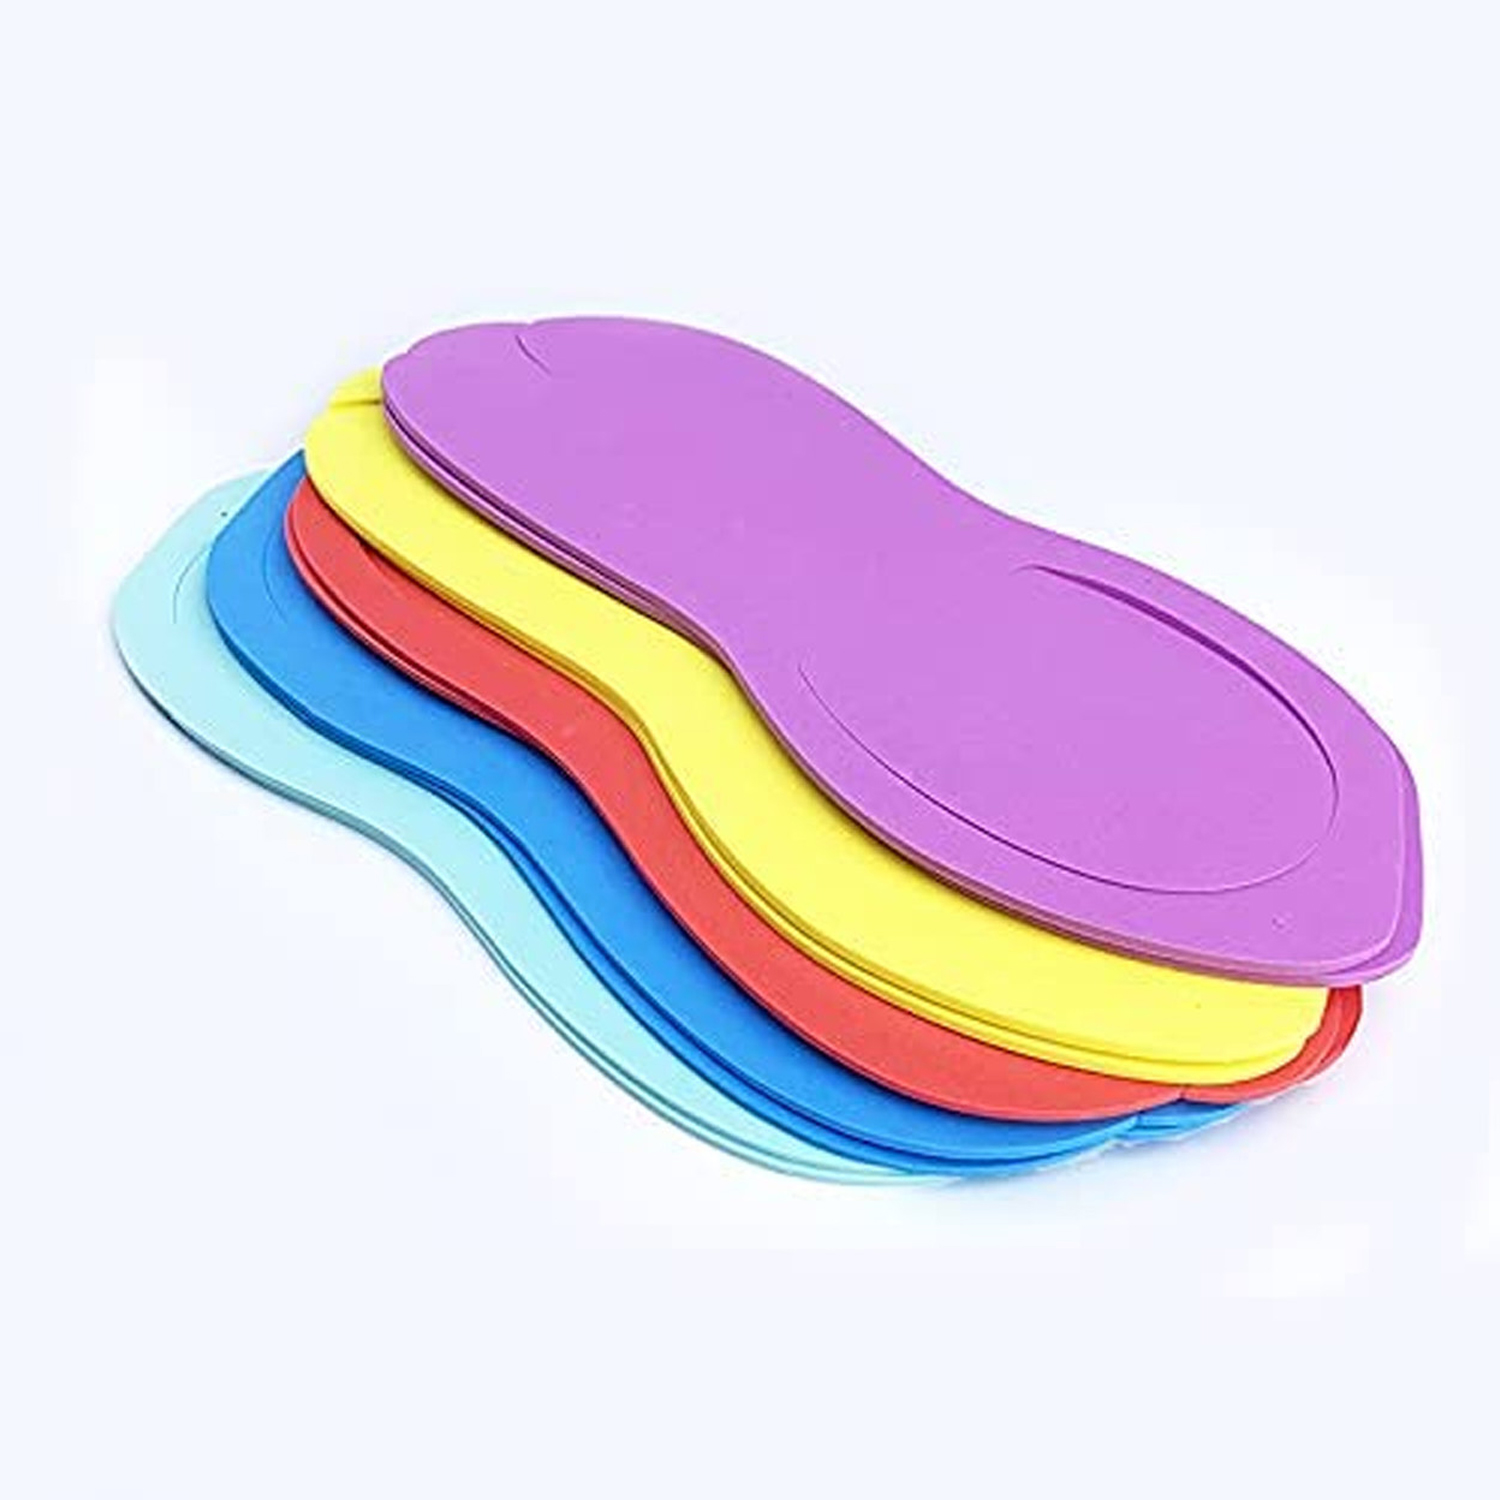 22-disposable-slippers-assorted-colors-2-blademaster.jpg